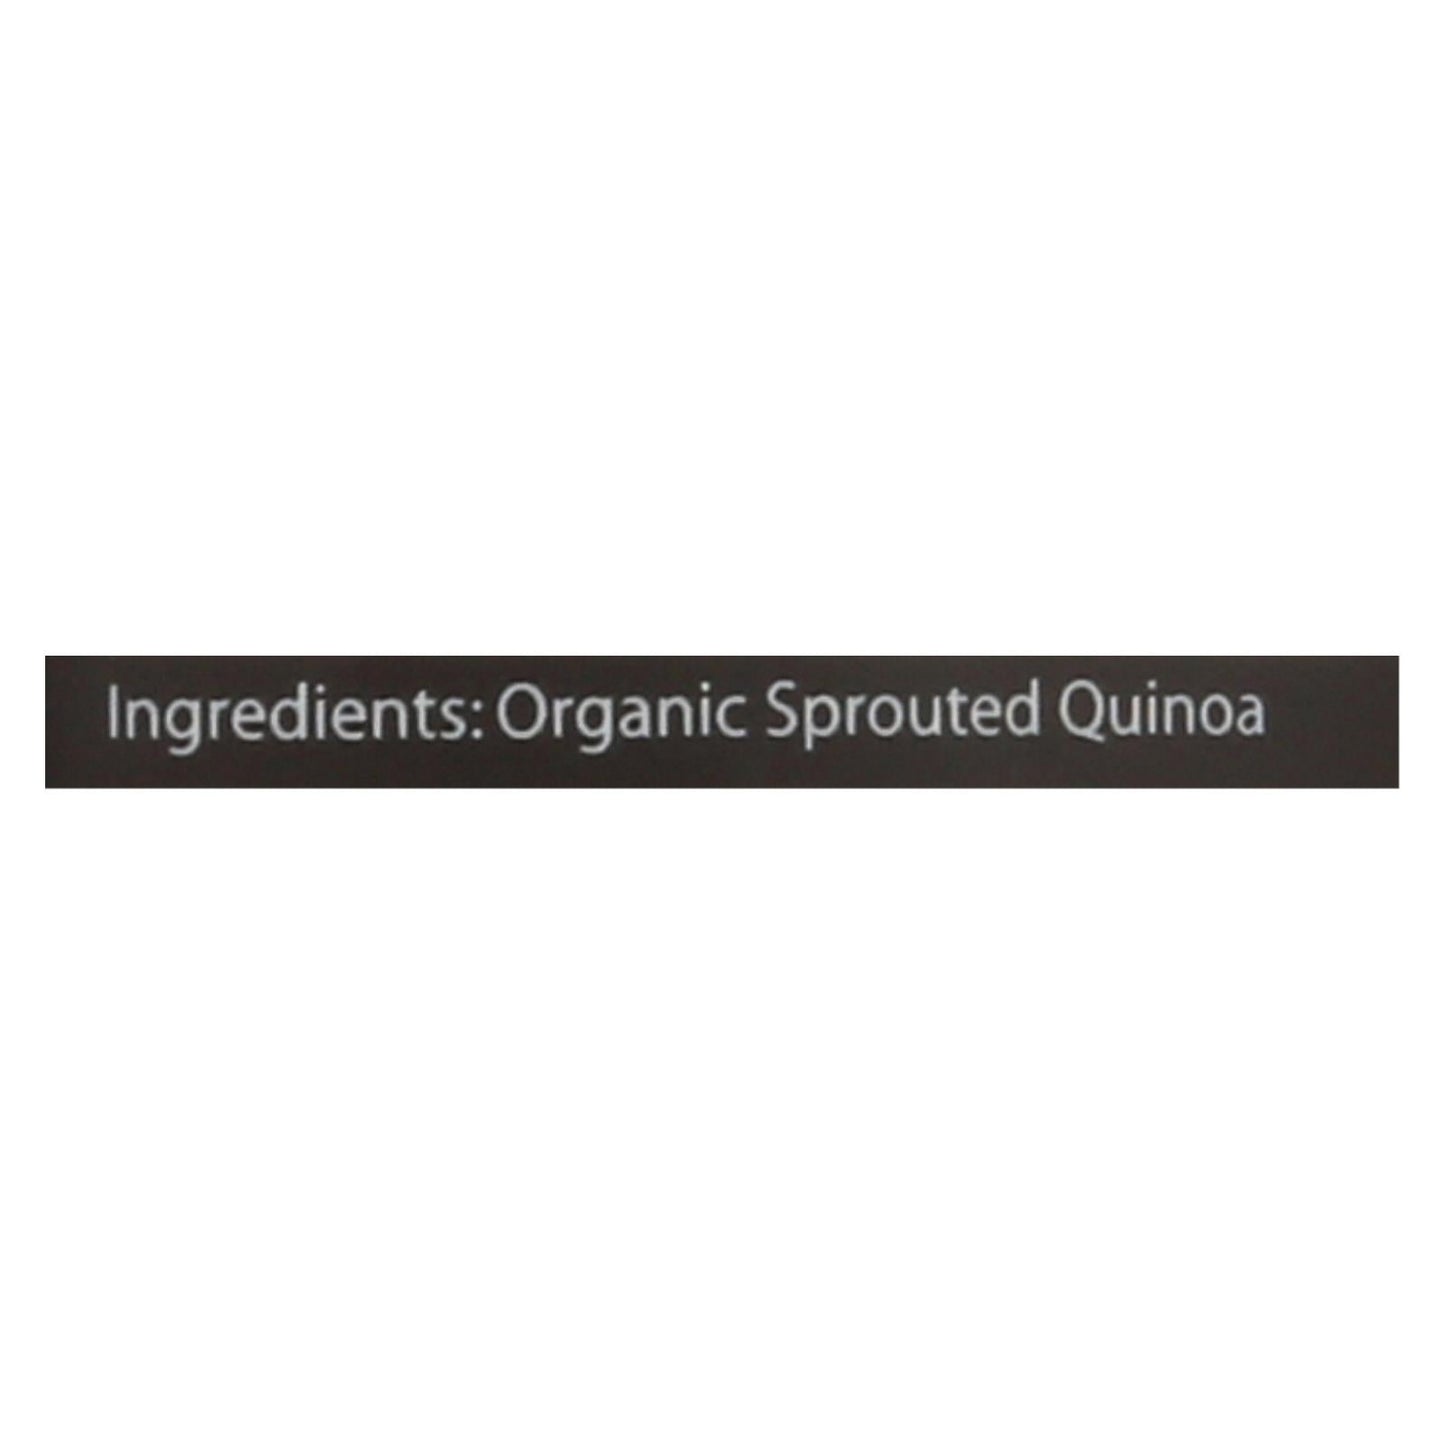 Truroots Organic Trio Quinoa - Accents Sprouted - Case Of 6 - 12 Oz. | OnlyNaturals.us